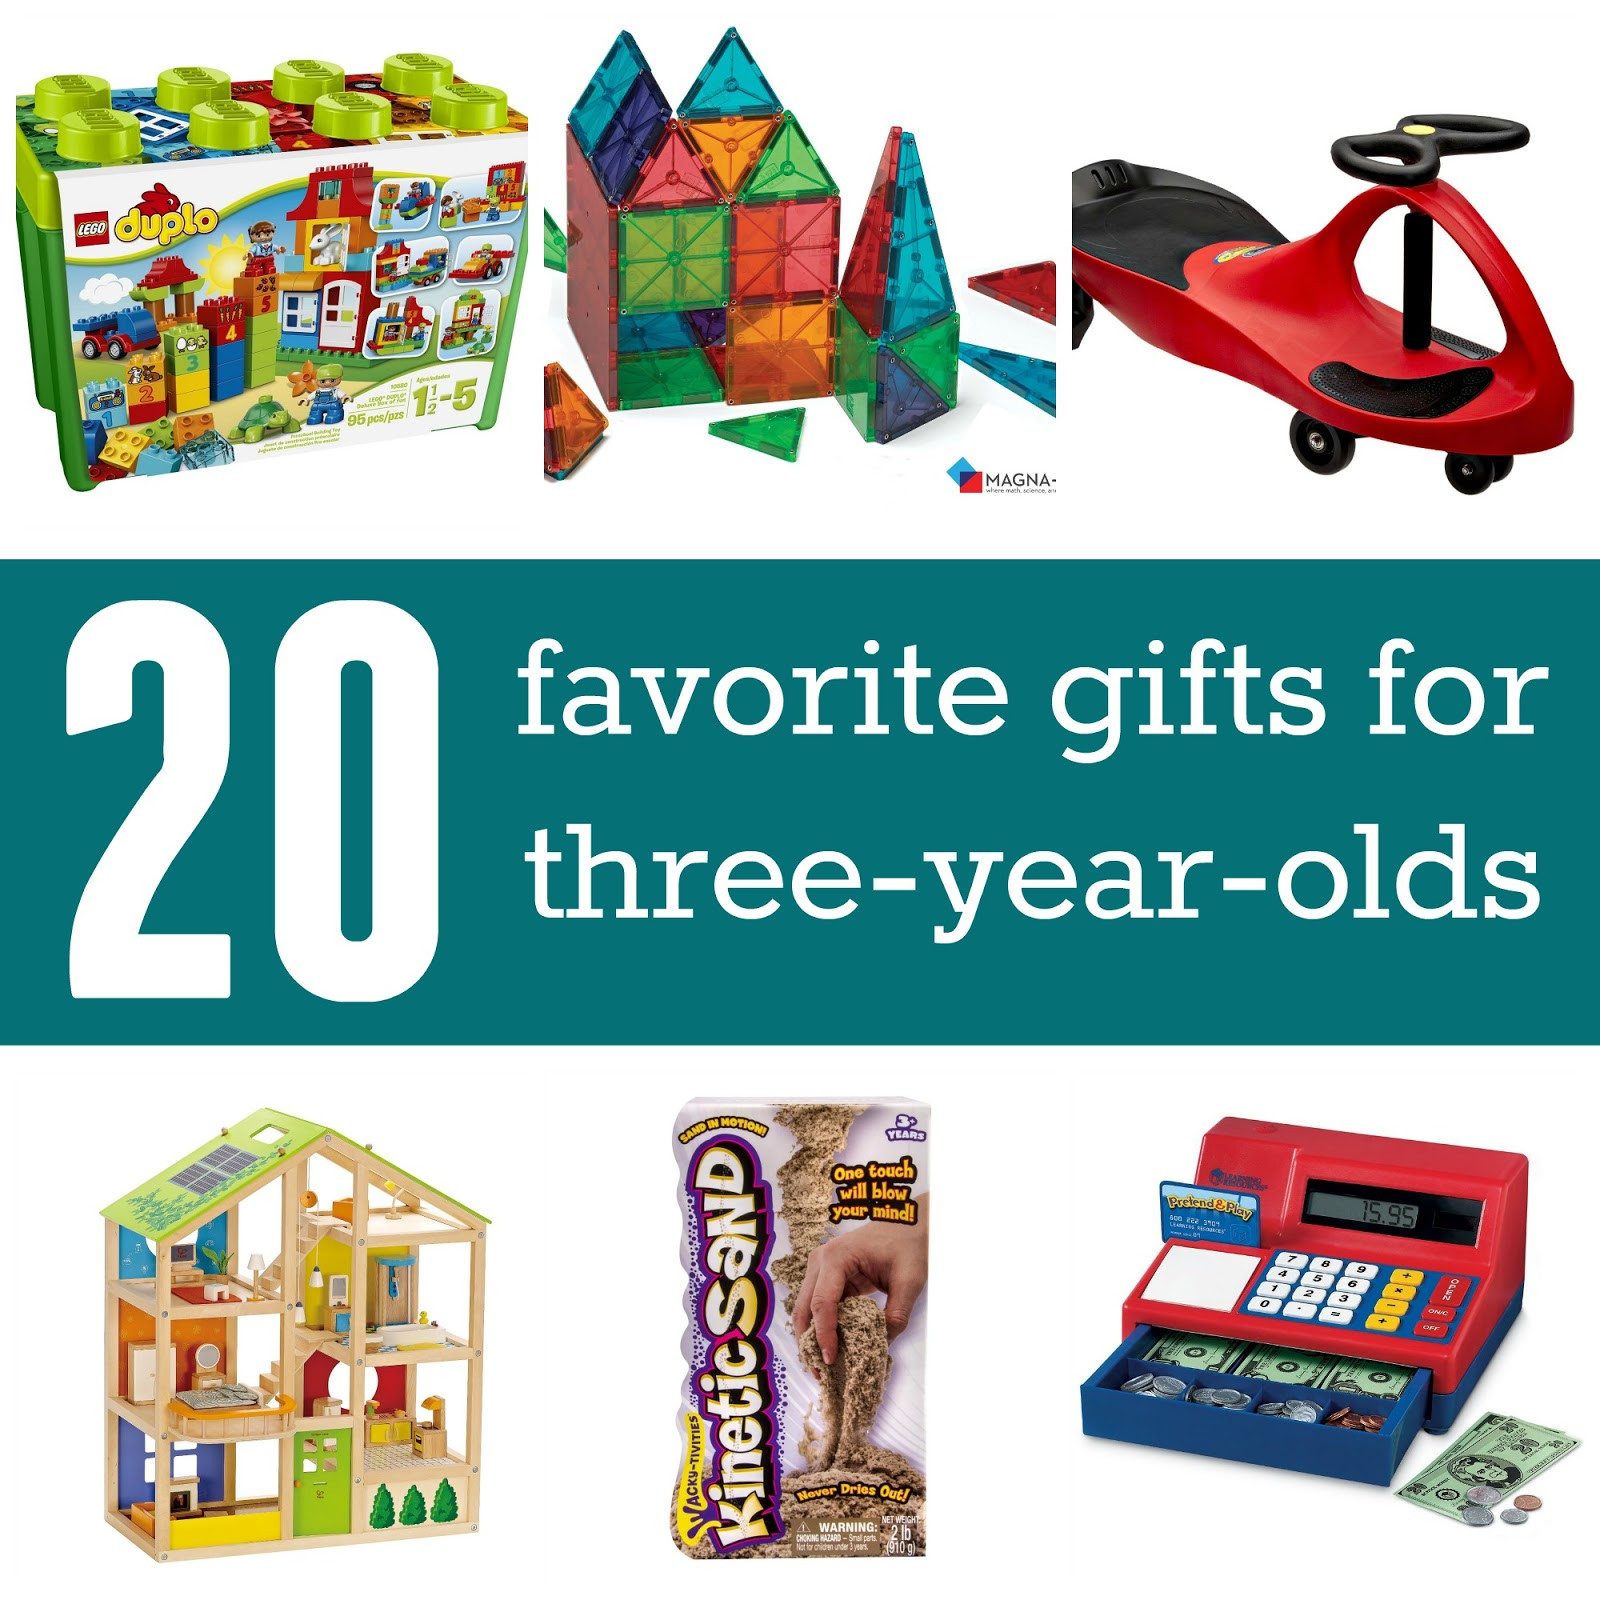 3 Year Old Gift Ideas Boys
 Toddler Approved Favorite Gifts for 3 year olds